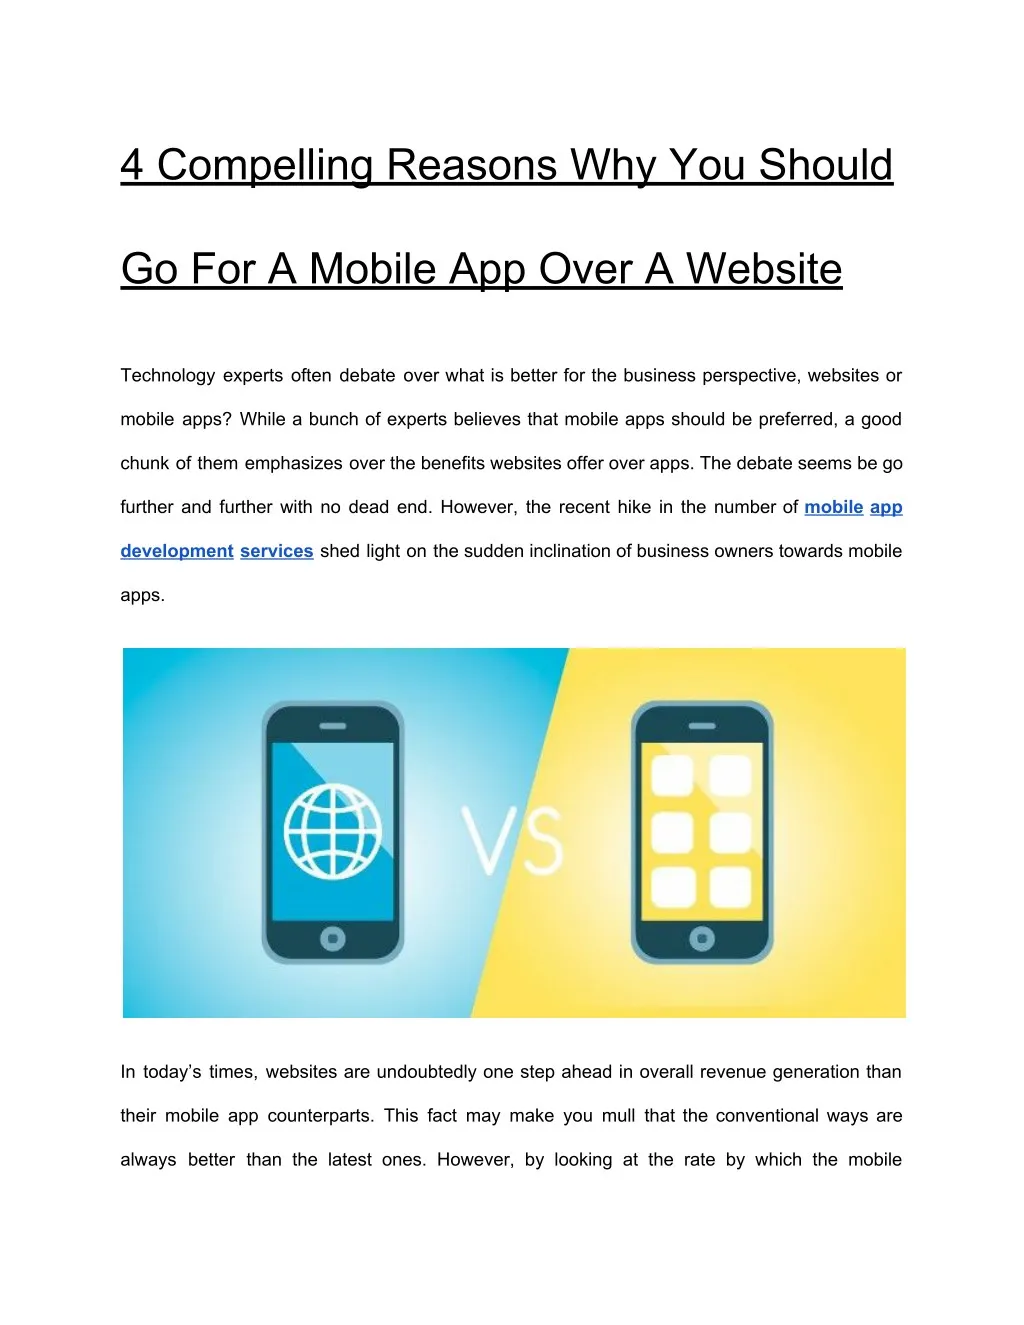 Ppt 4 Compelling Reasons Why You Should Go For A Mobile App Over A Website Powerpoint